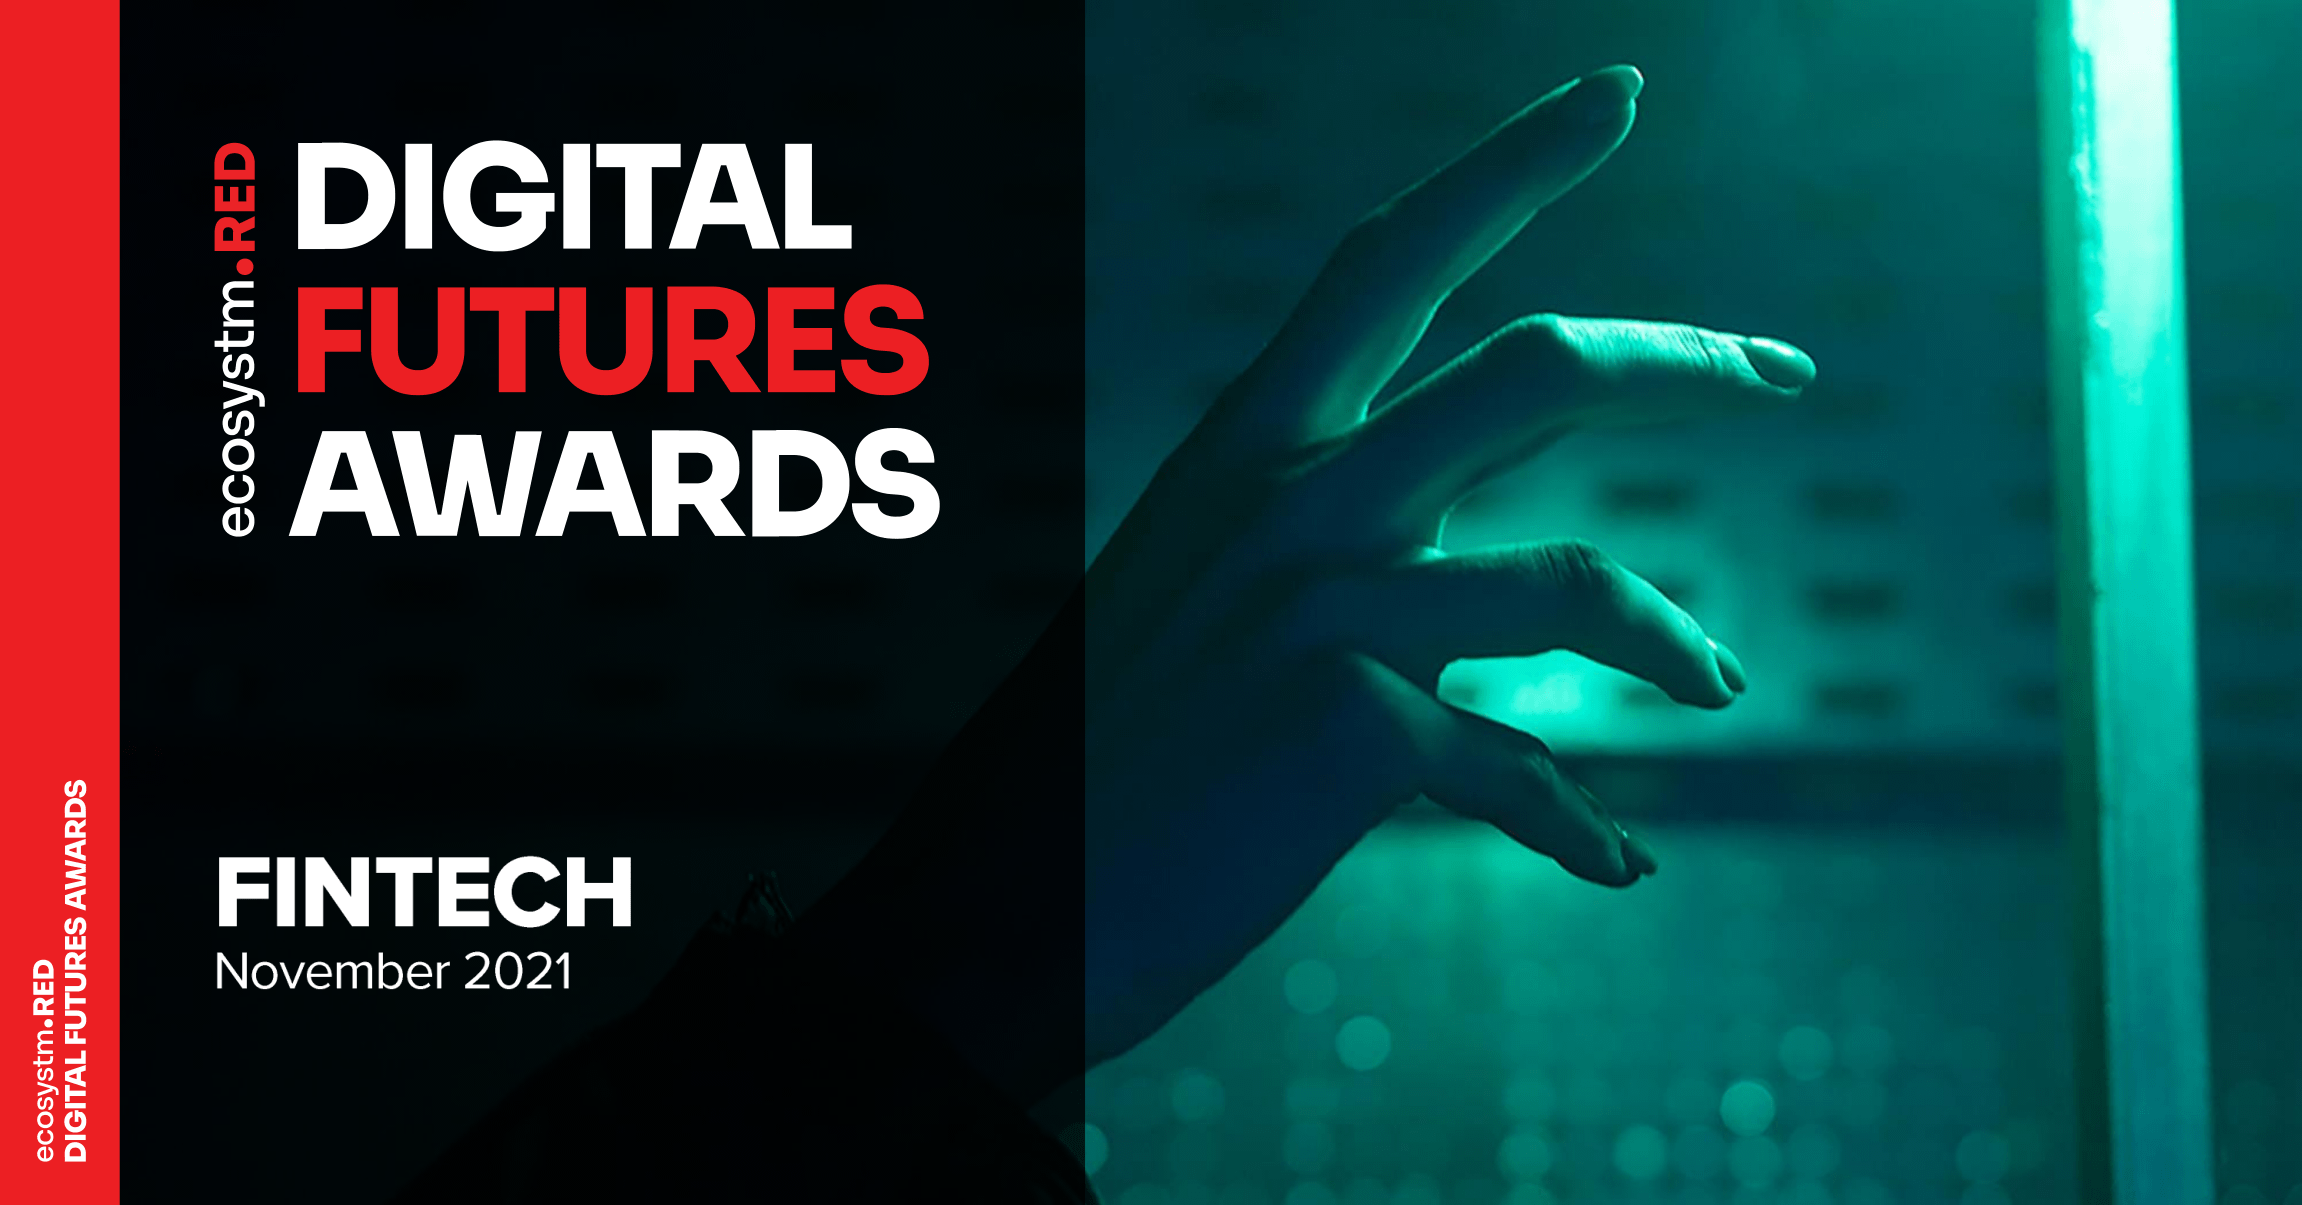 Ecosystm-Red-Global-Digital-Futures-Awards-FinTech-1